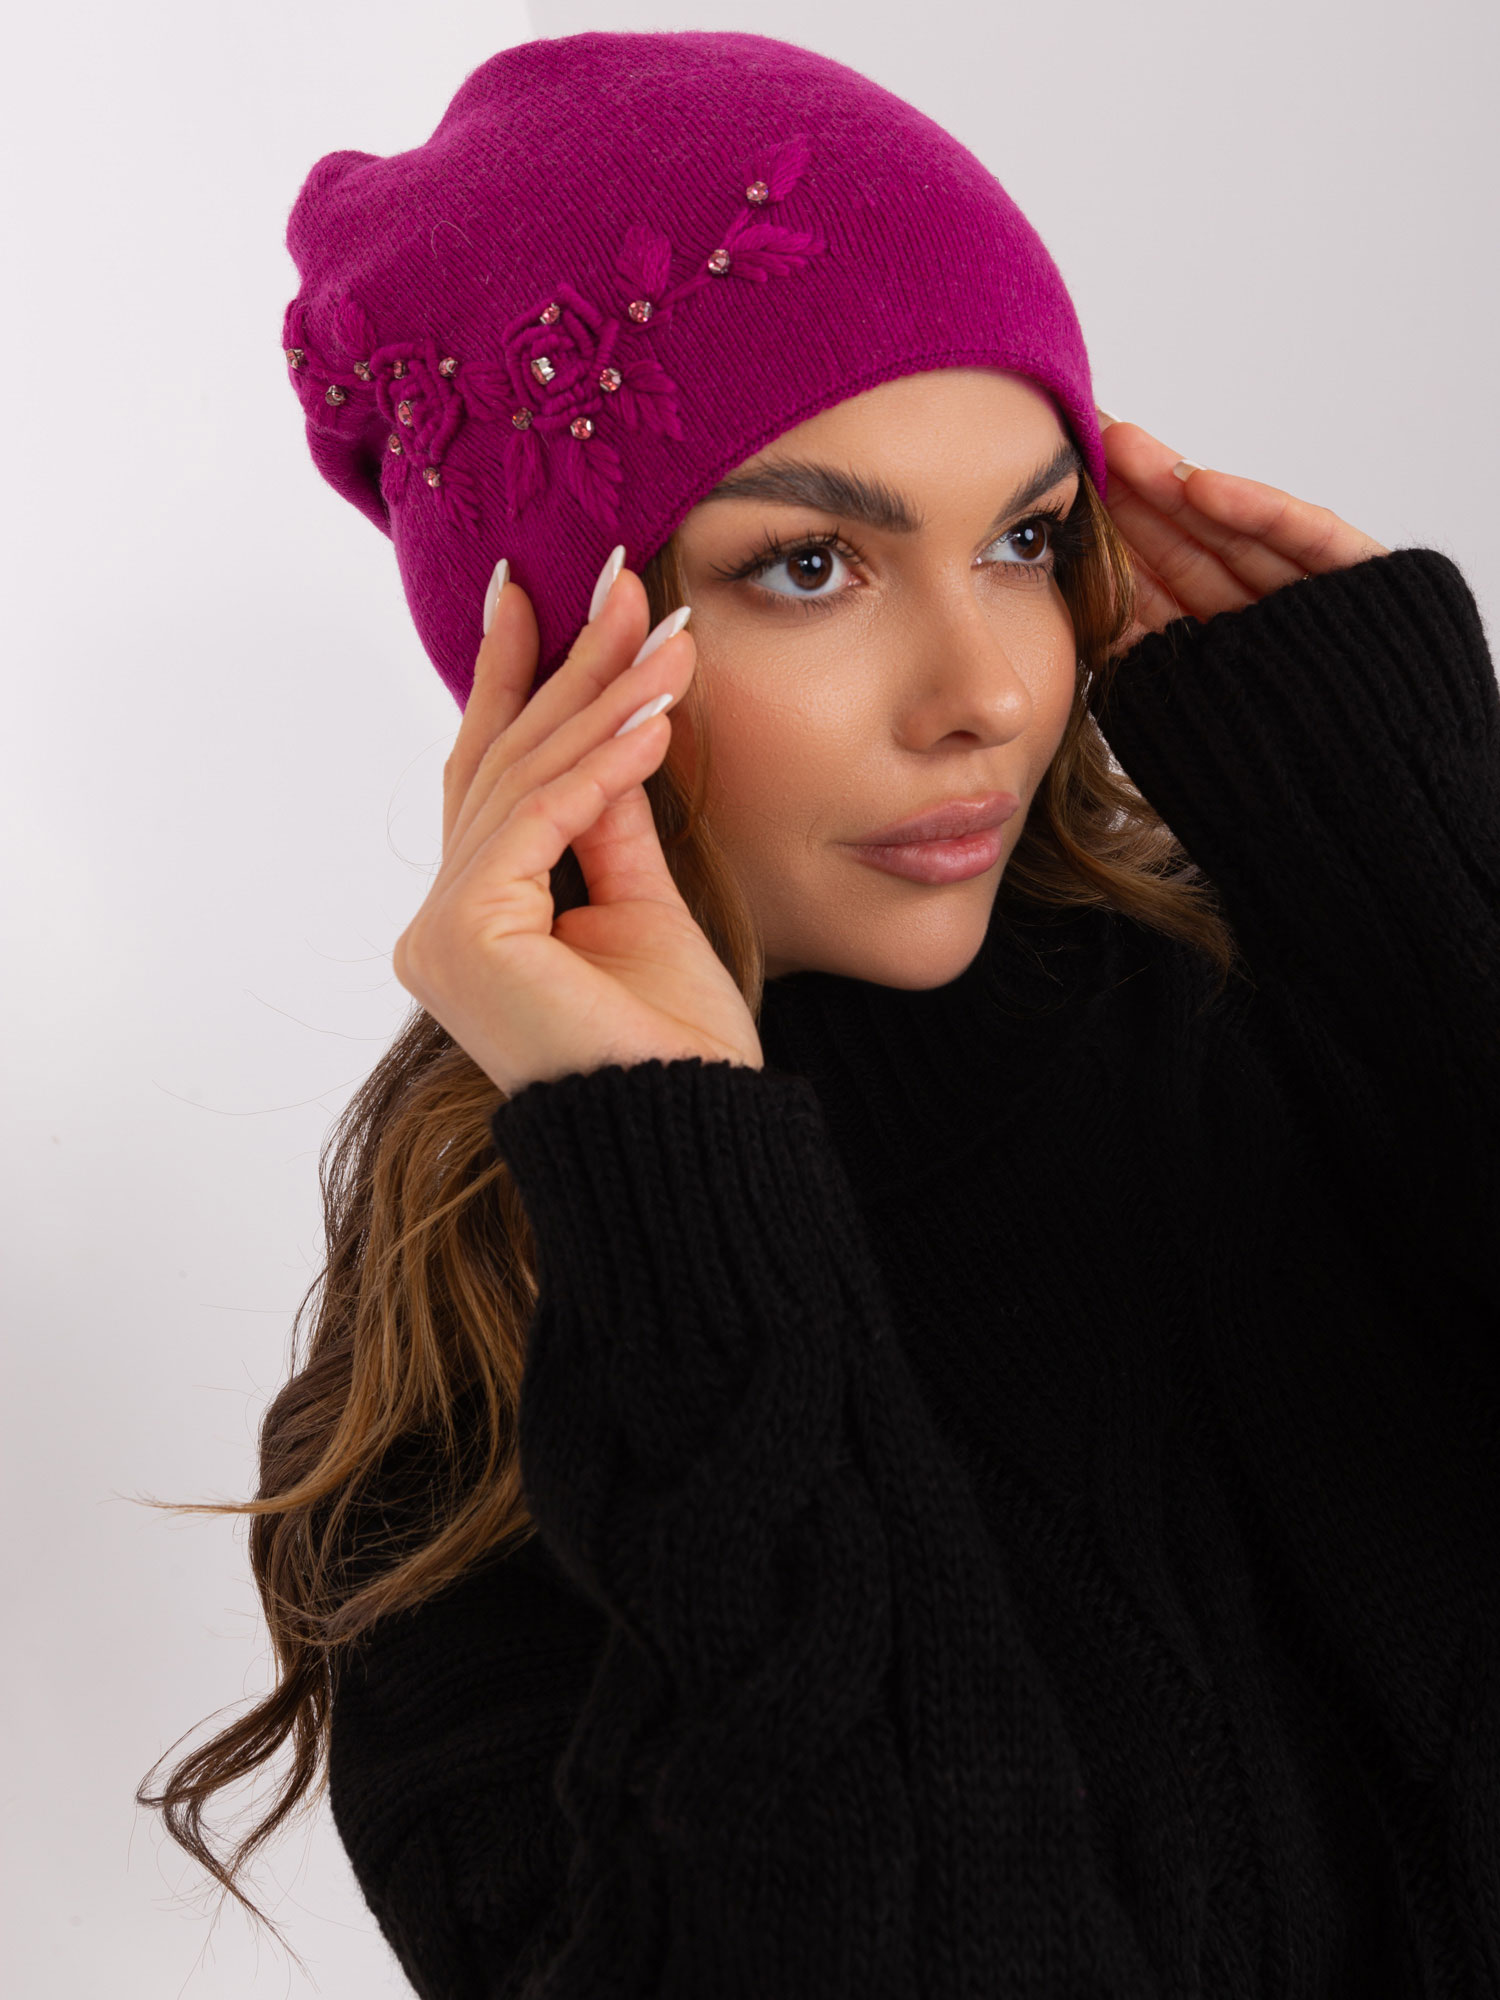 Fuchsia winter hat with embroidery